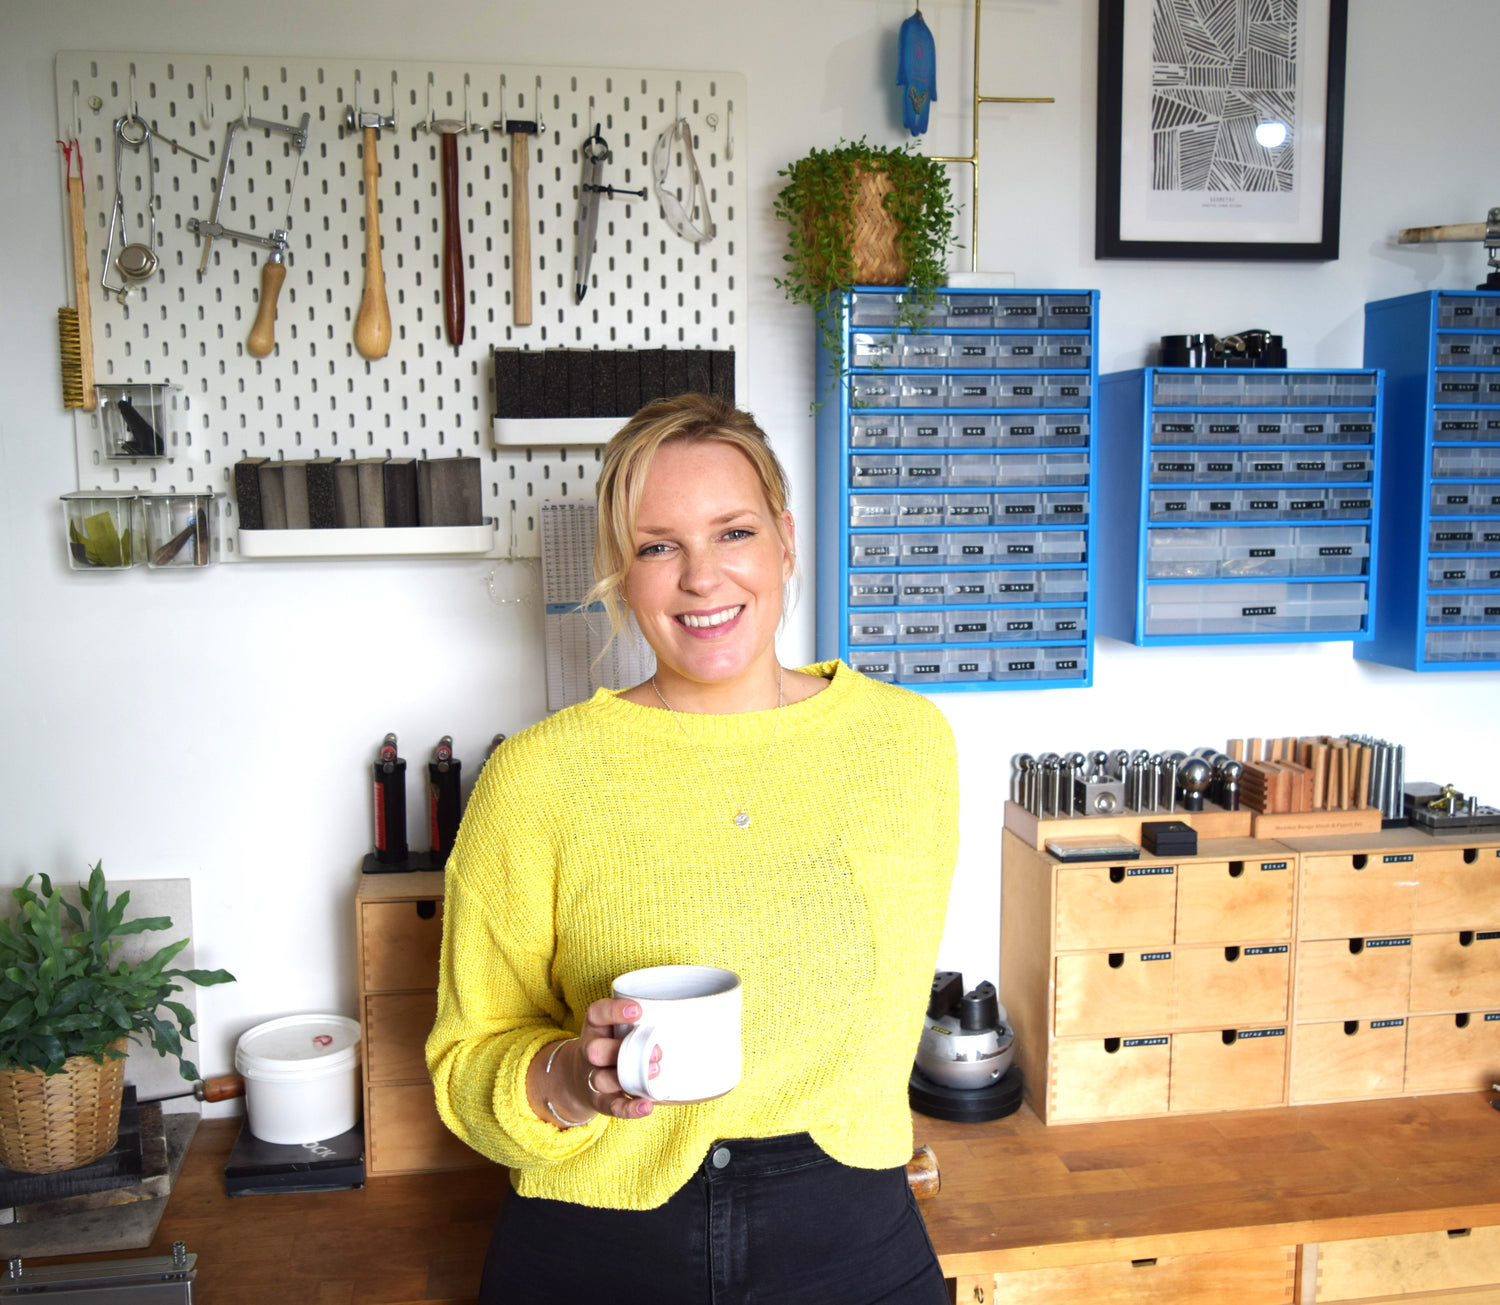 Image of silversmith Claire Maleham standing in her studio with equipment behind her